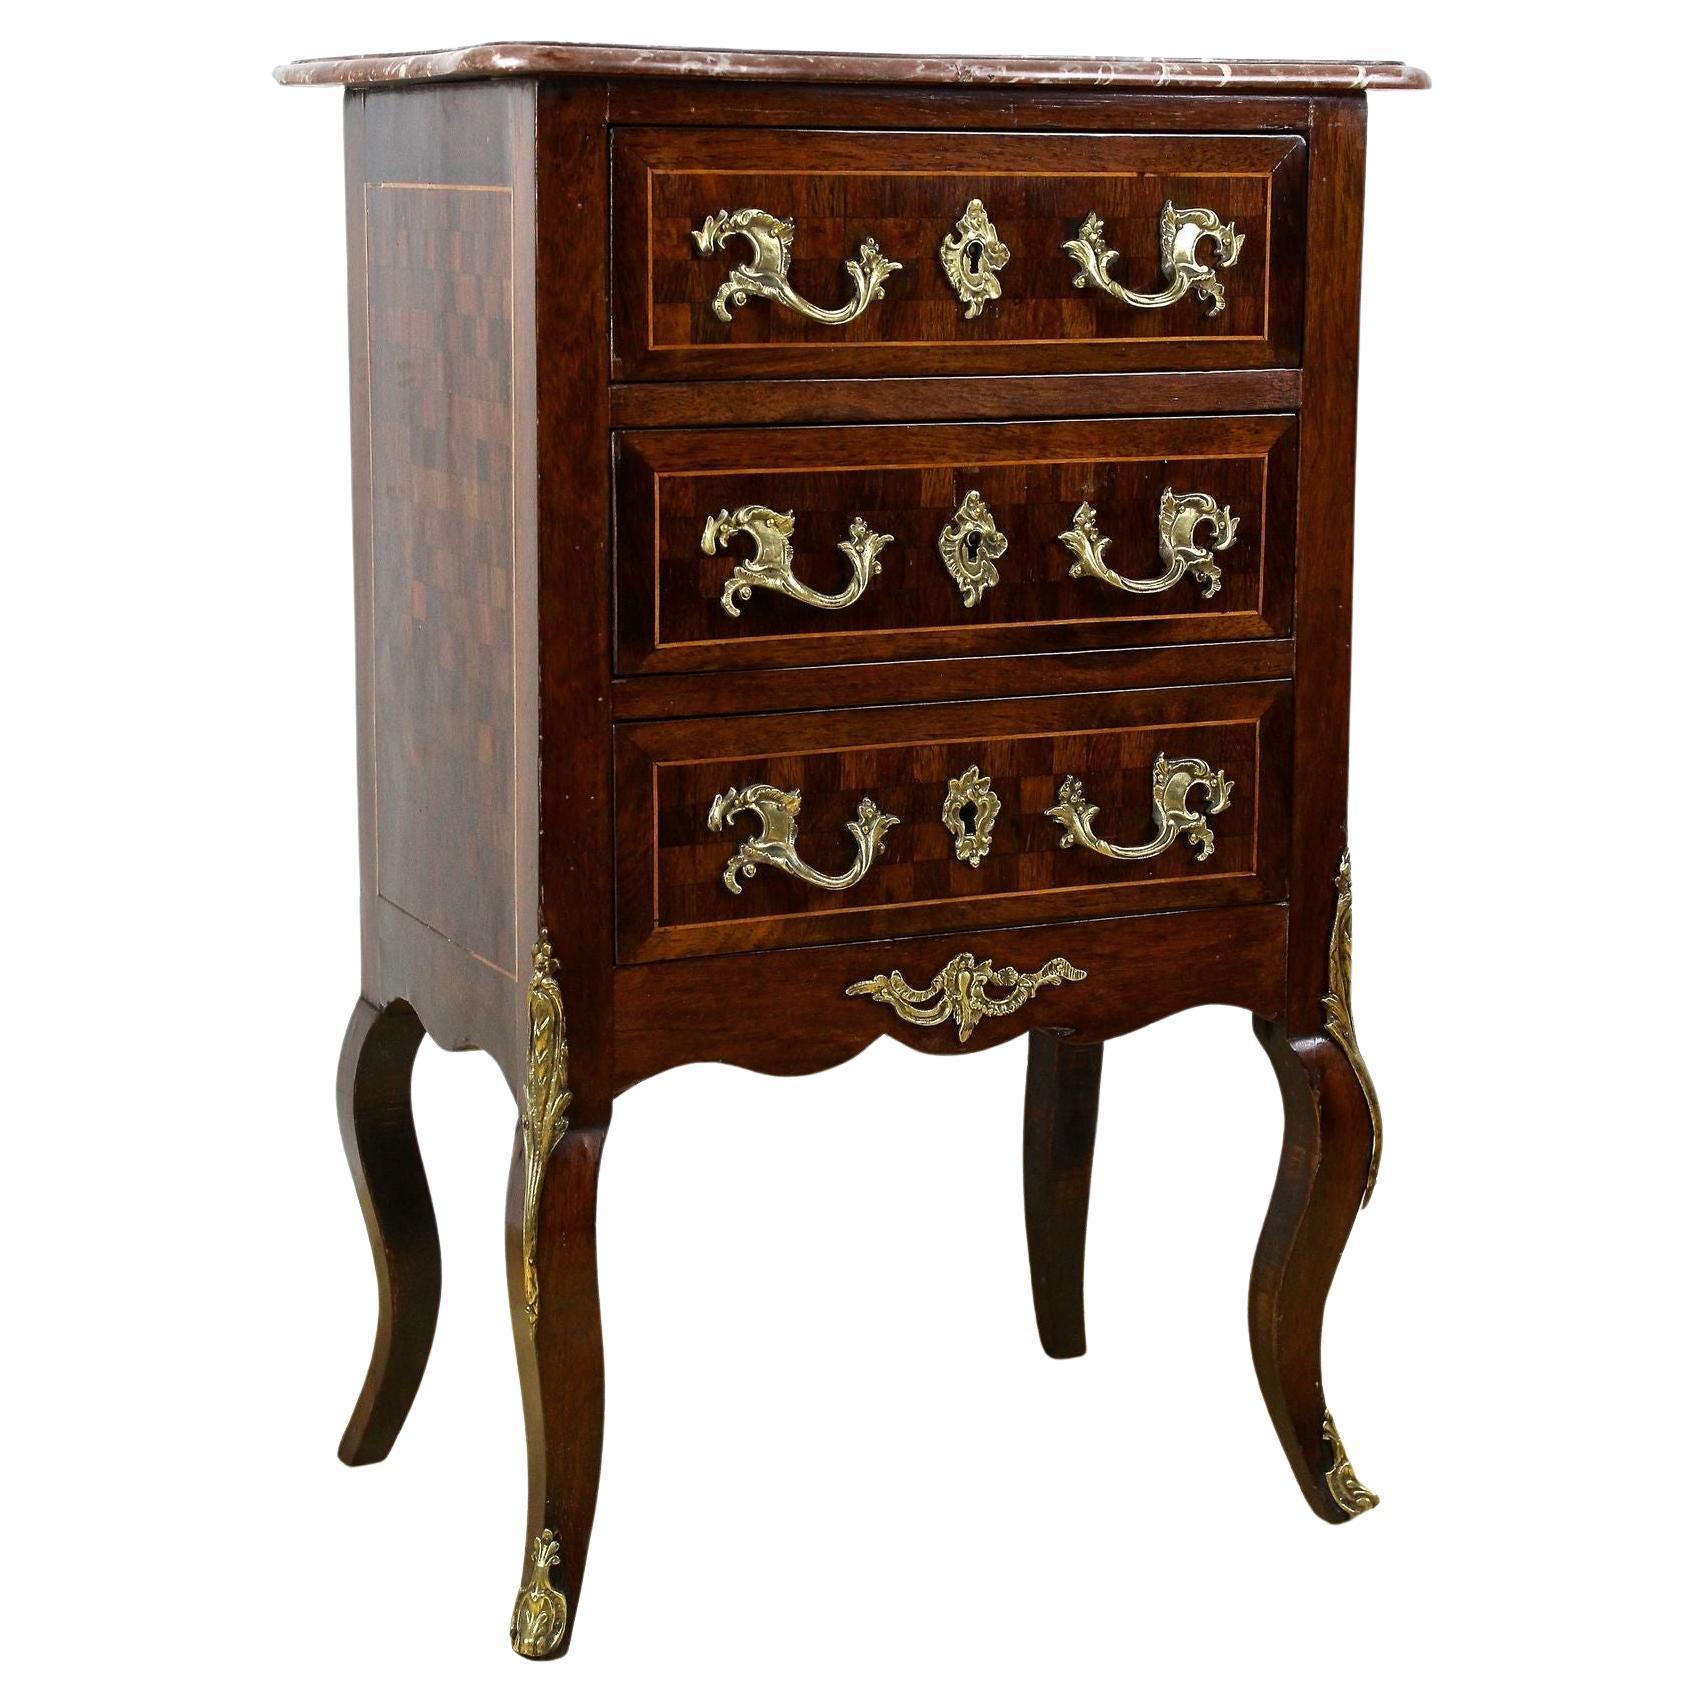 19th Century Baroque Revival Chest of Drawers, France, circa 1880